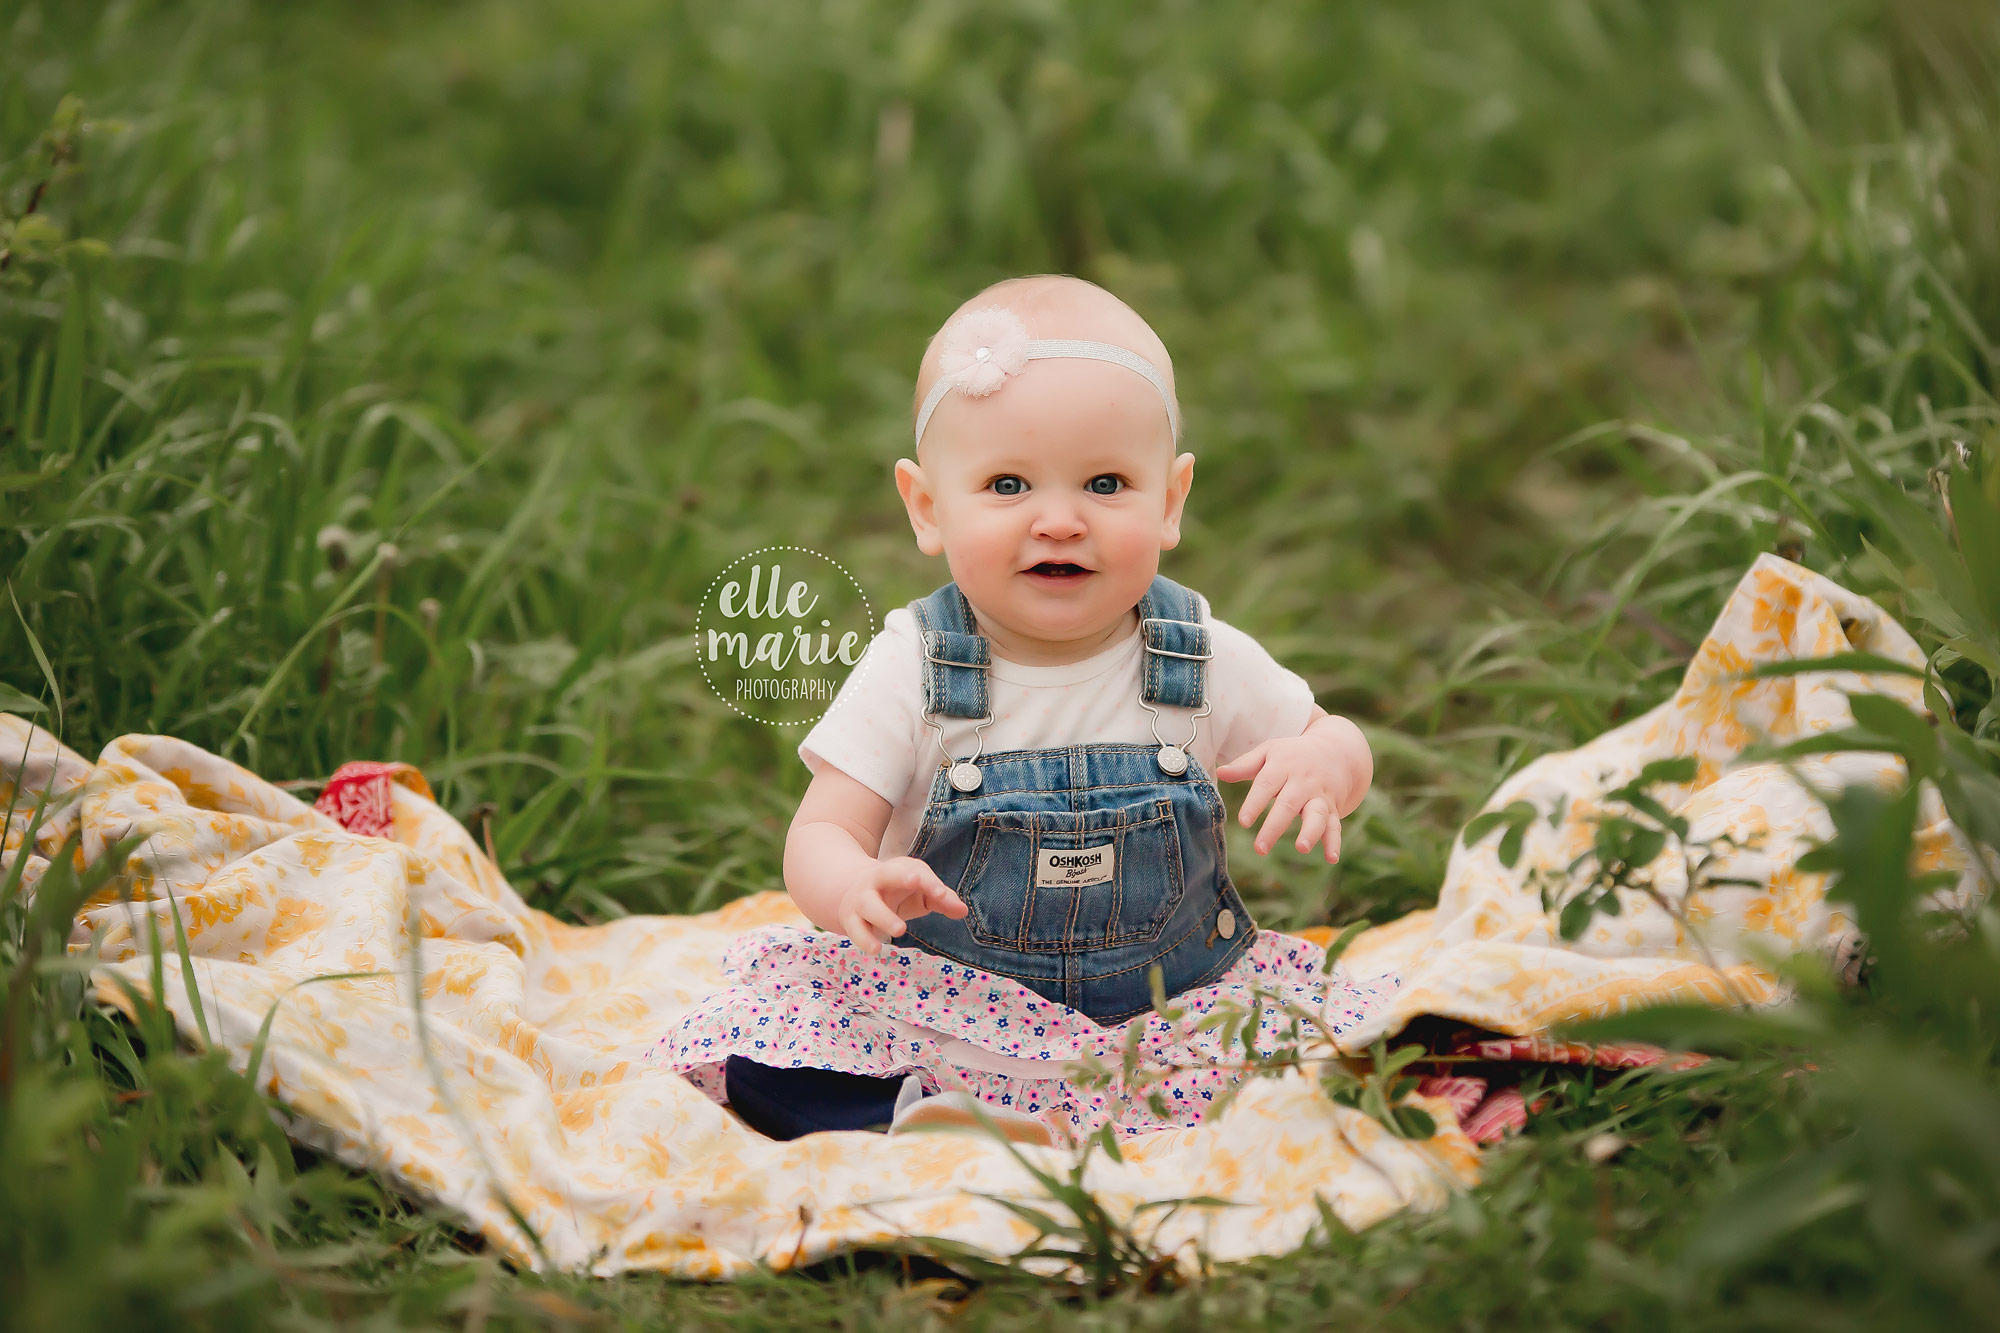 9 month old baby girl sits on quilt in grass